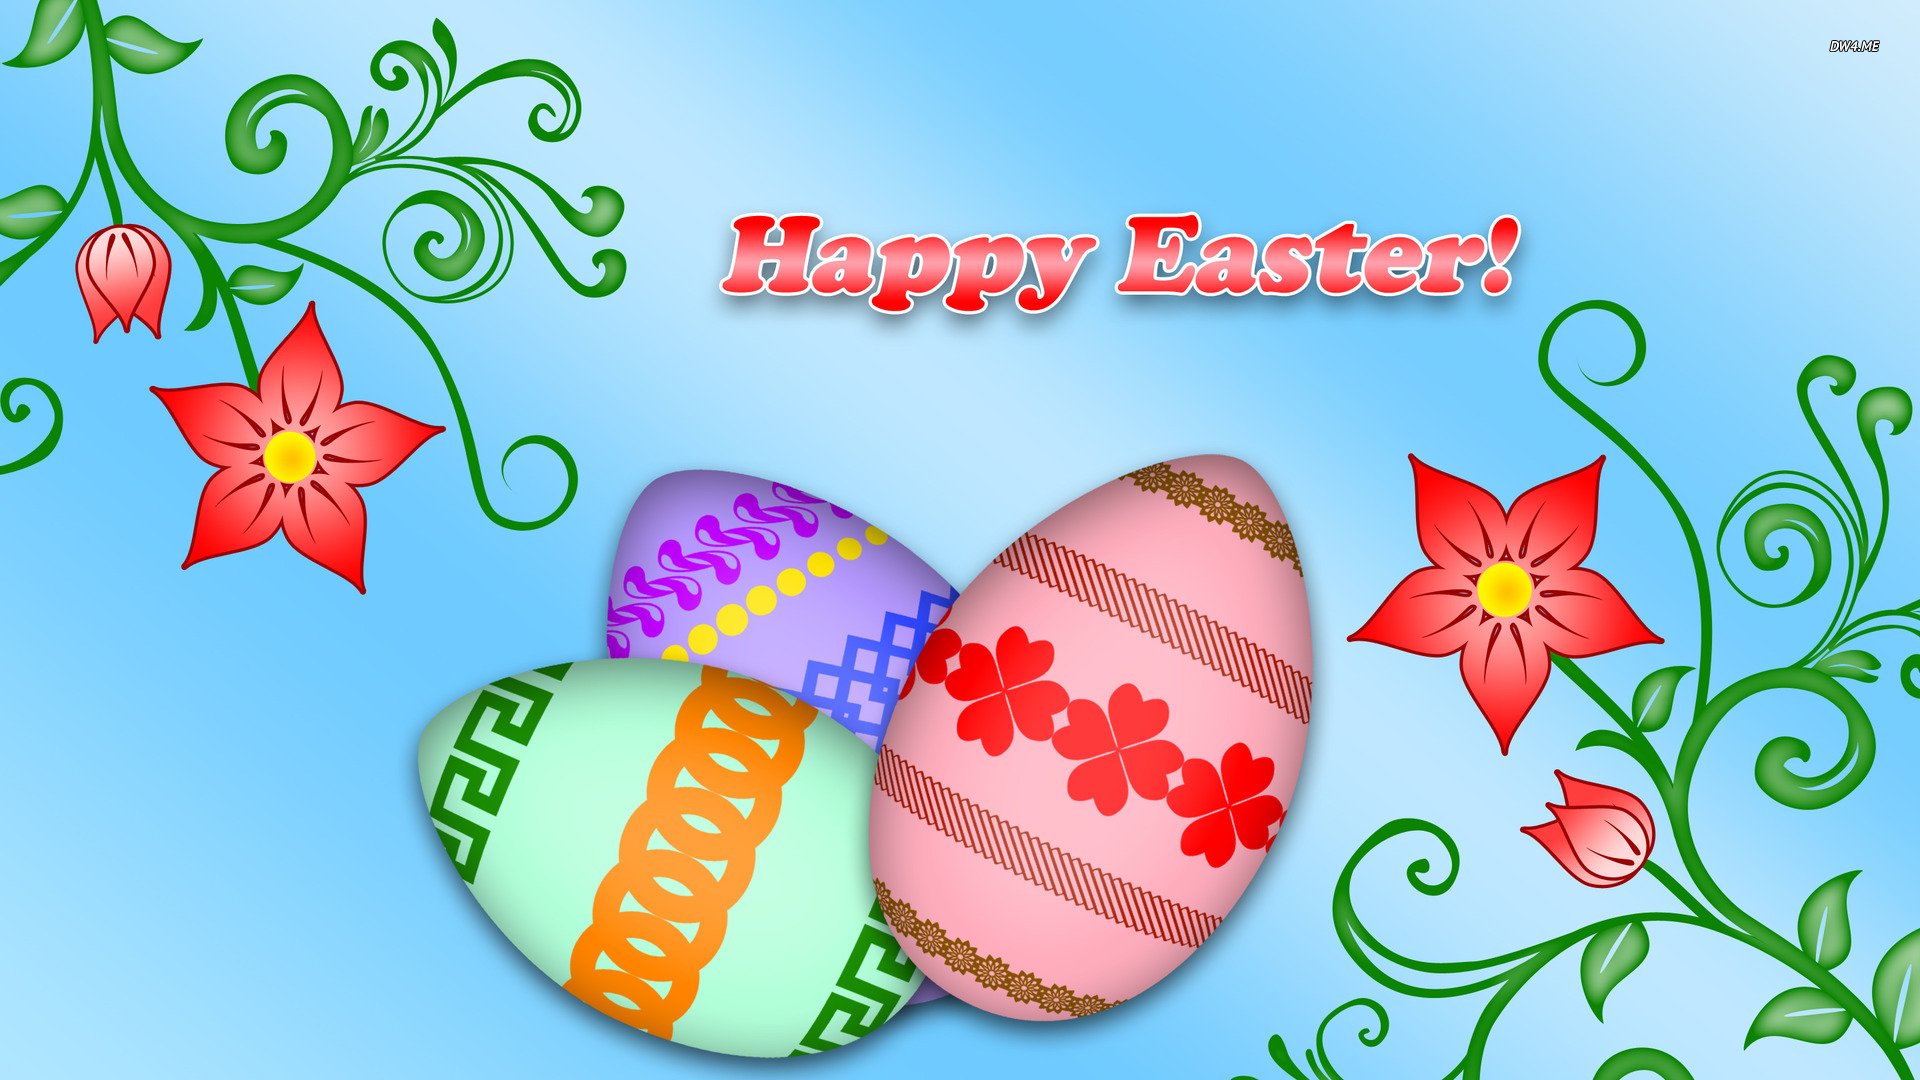 Happy Easter wallpaper   Holiday wallpapers   1264